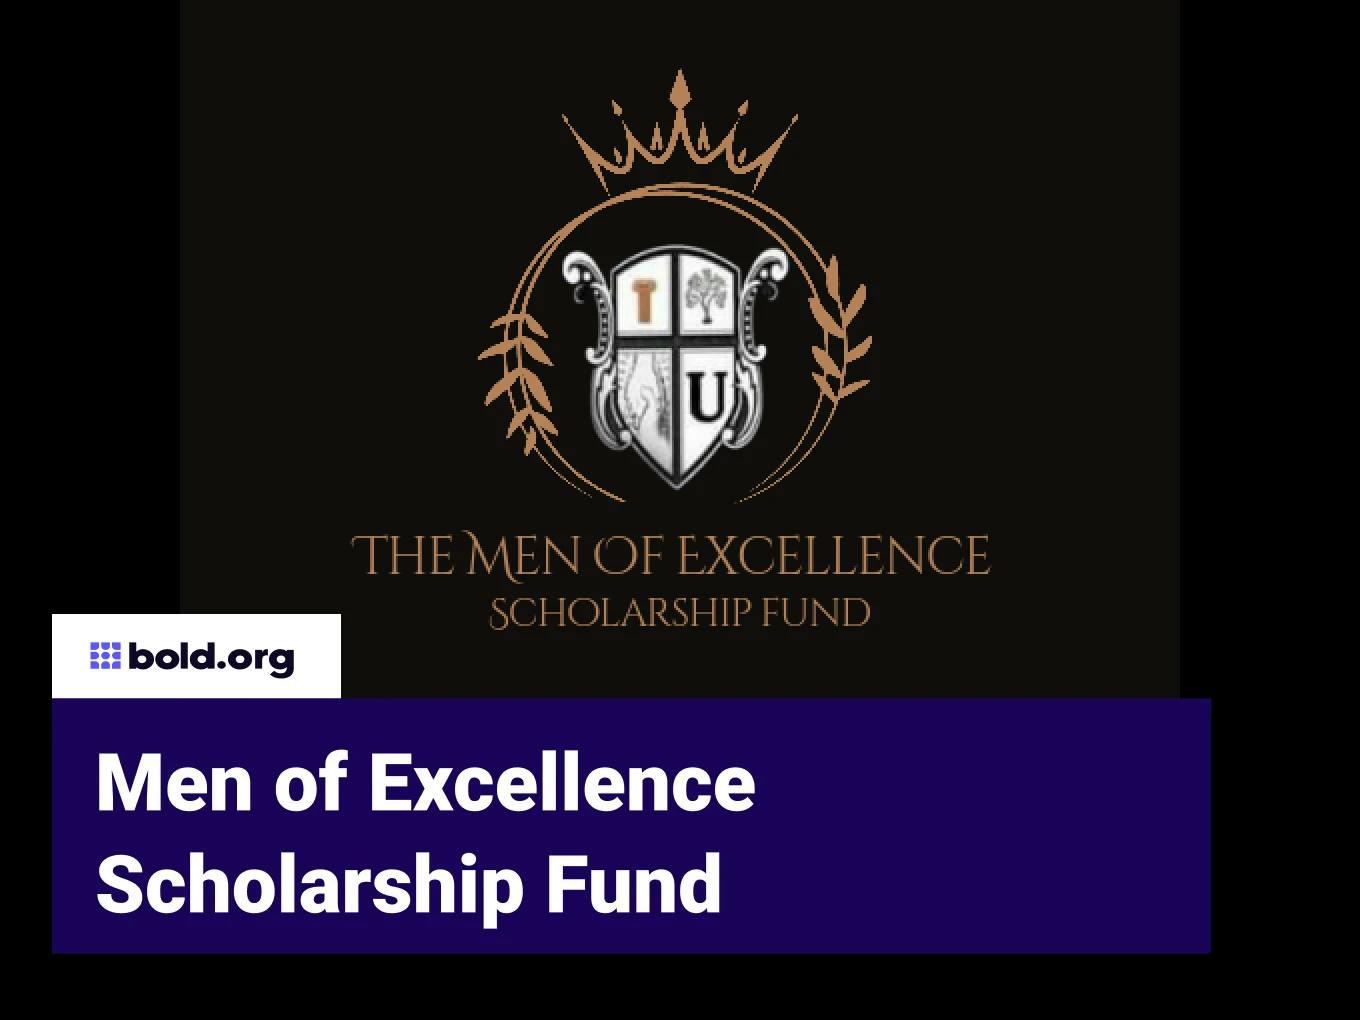 Men of Excellence Scholarship Fund